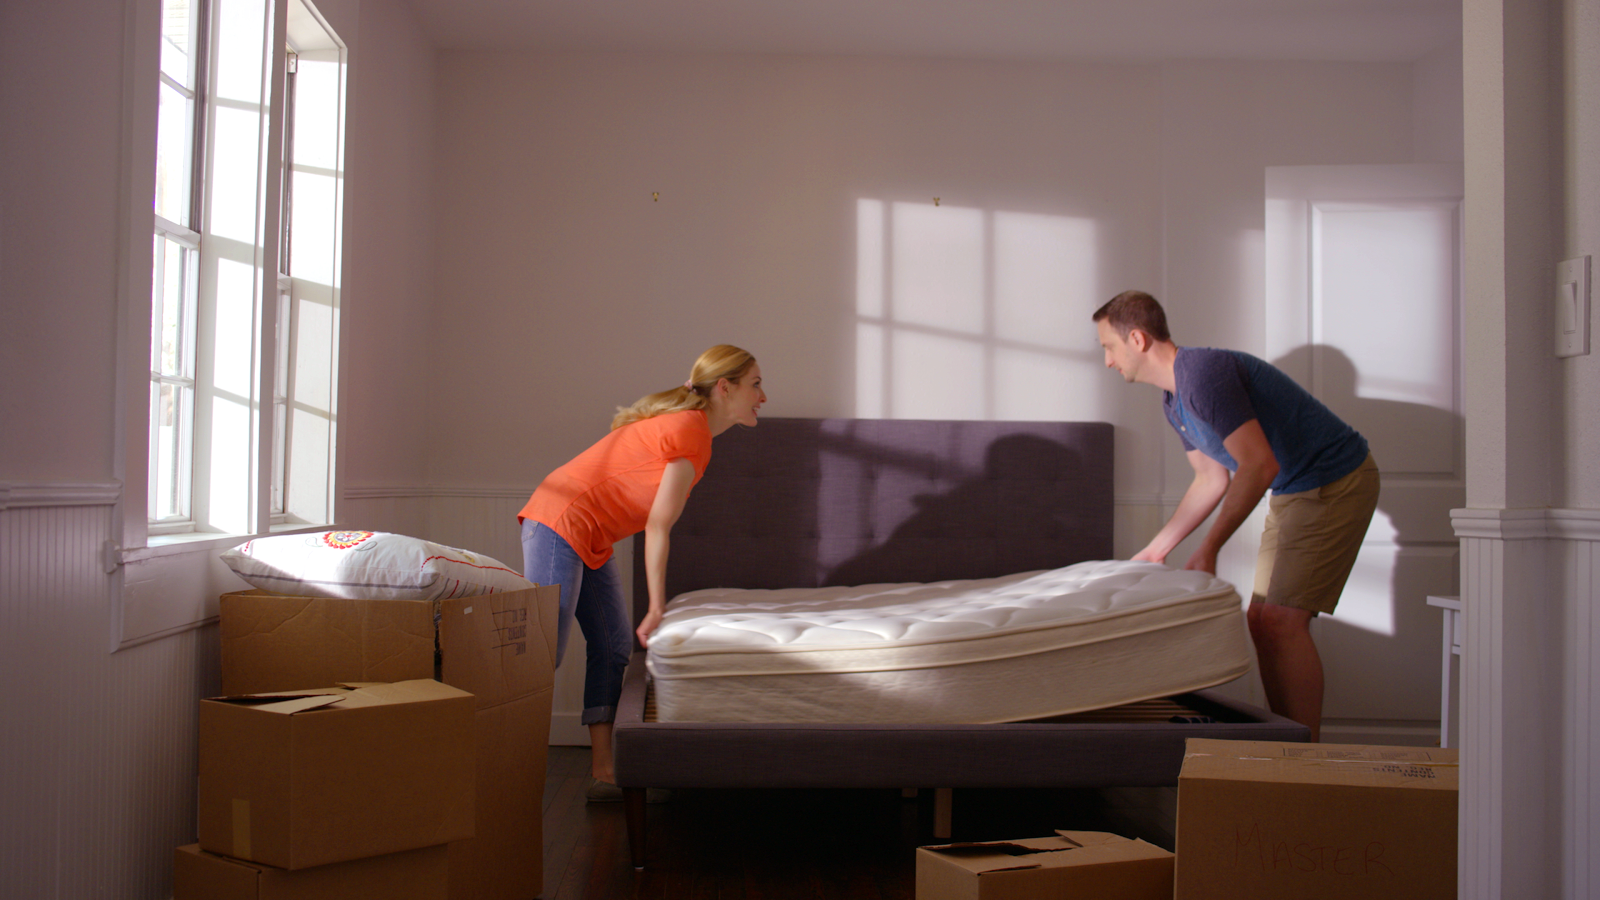 Ways To Move A Mattress – A Step-By-Step Guide